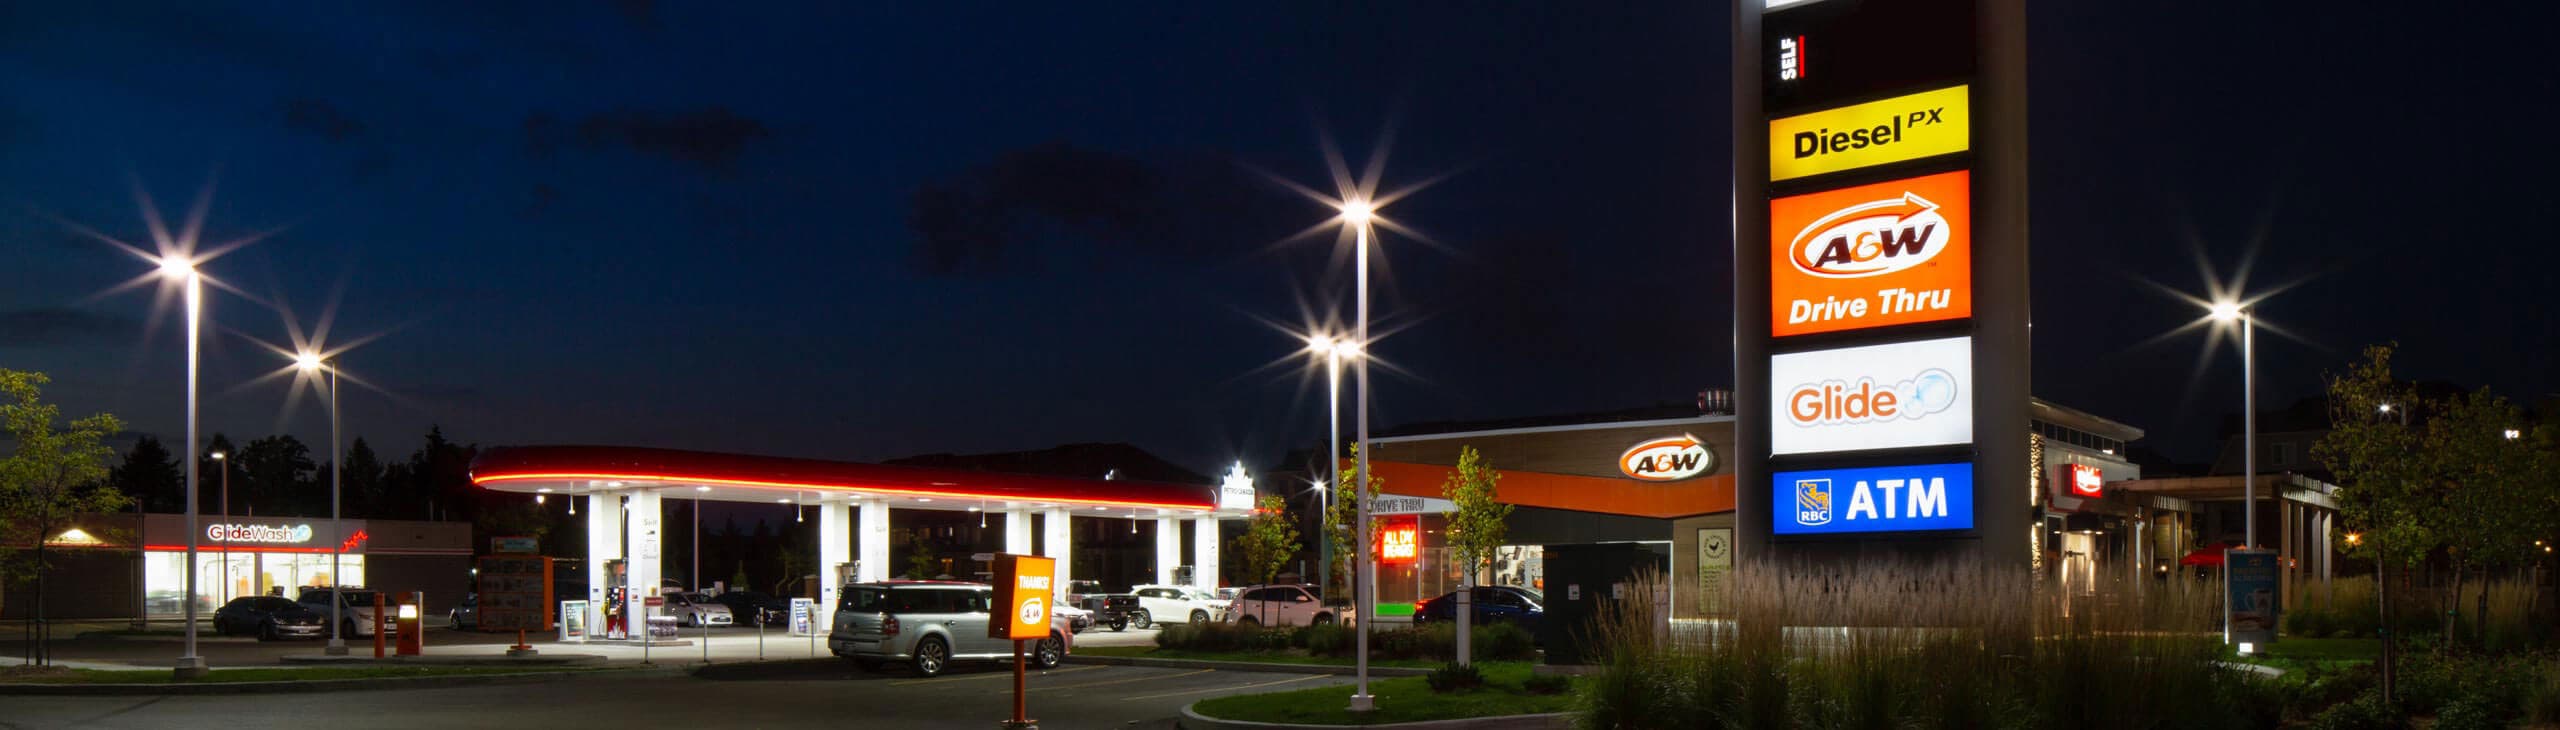 A Petro-Canada gas station at night.